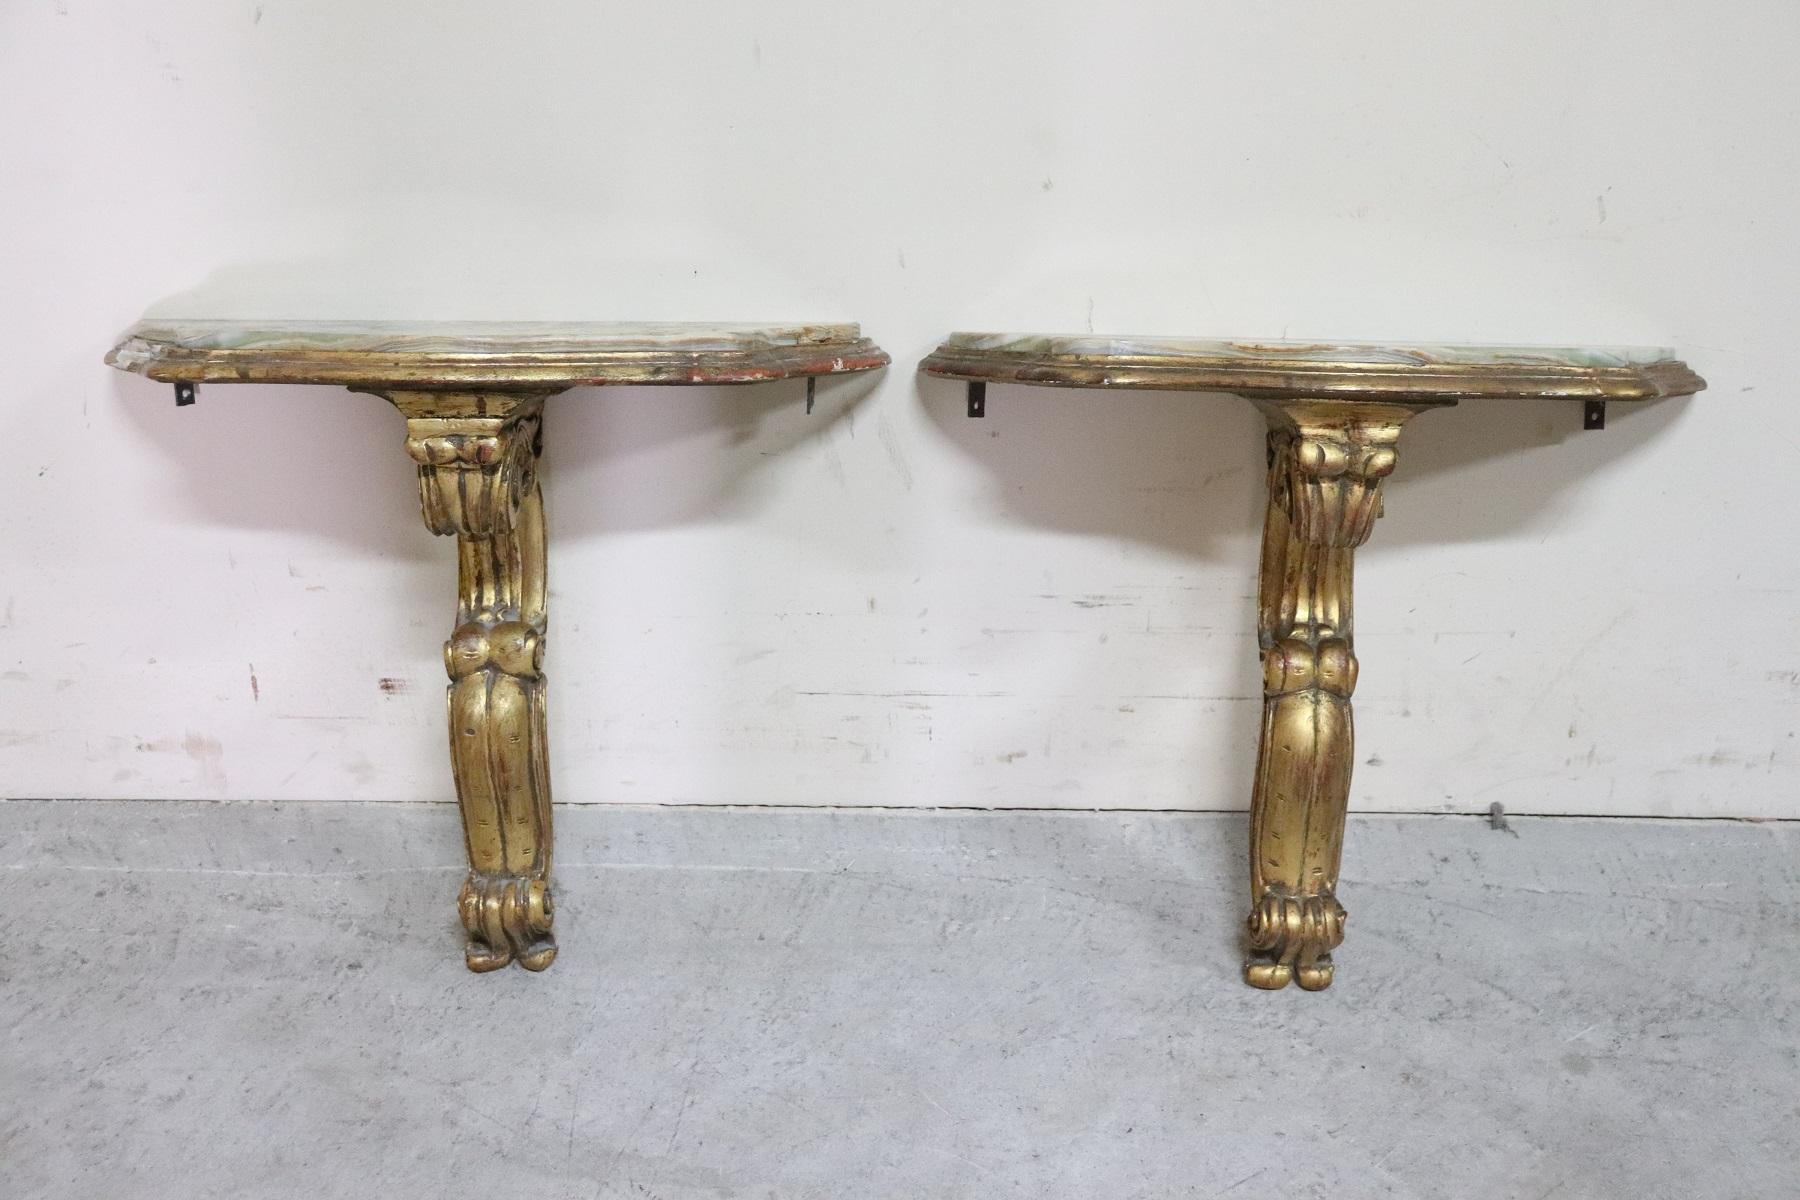 Rare Italian baroque style pair of console table in carved and gilded wood. The wood is finely carved with volutes and curls. Precious decoration in gold daughter. The top is in beautiful jade color onyx. This pair of consoles is perfect to be used